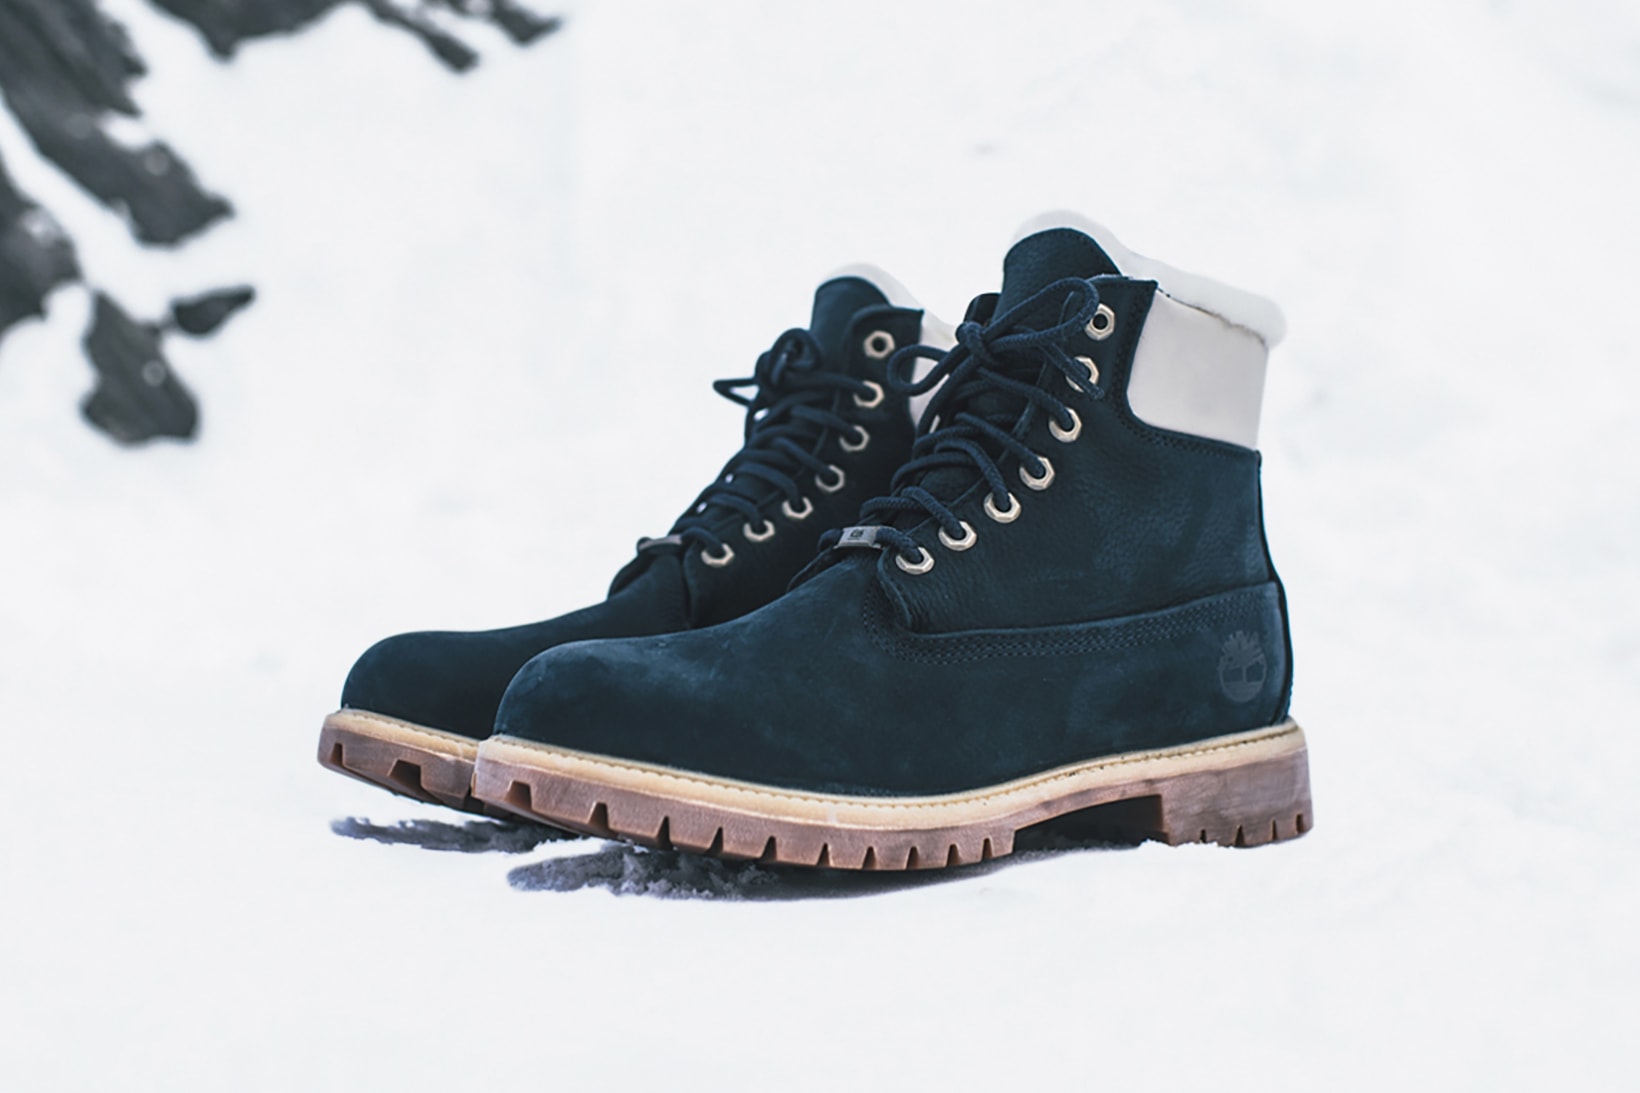 Ronnie Fieg Timberland KITH Chapter 3 distressed rust leather black navy nylon cream shearling release date footwear January 20